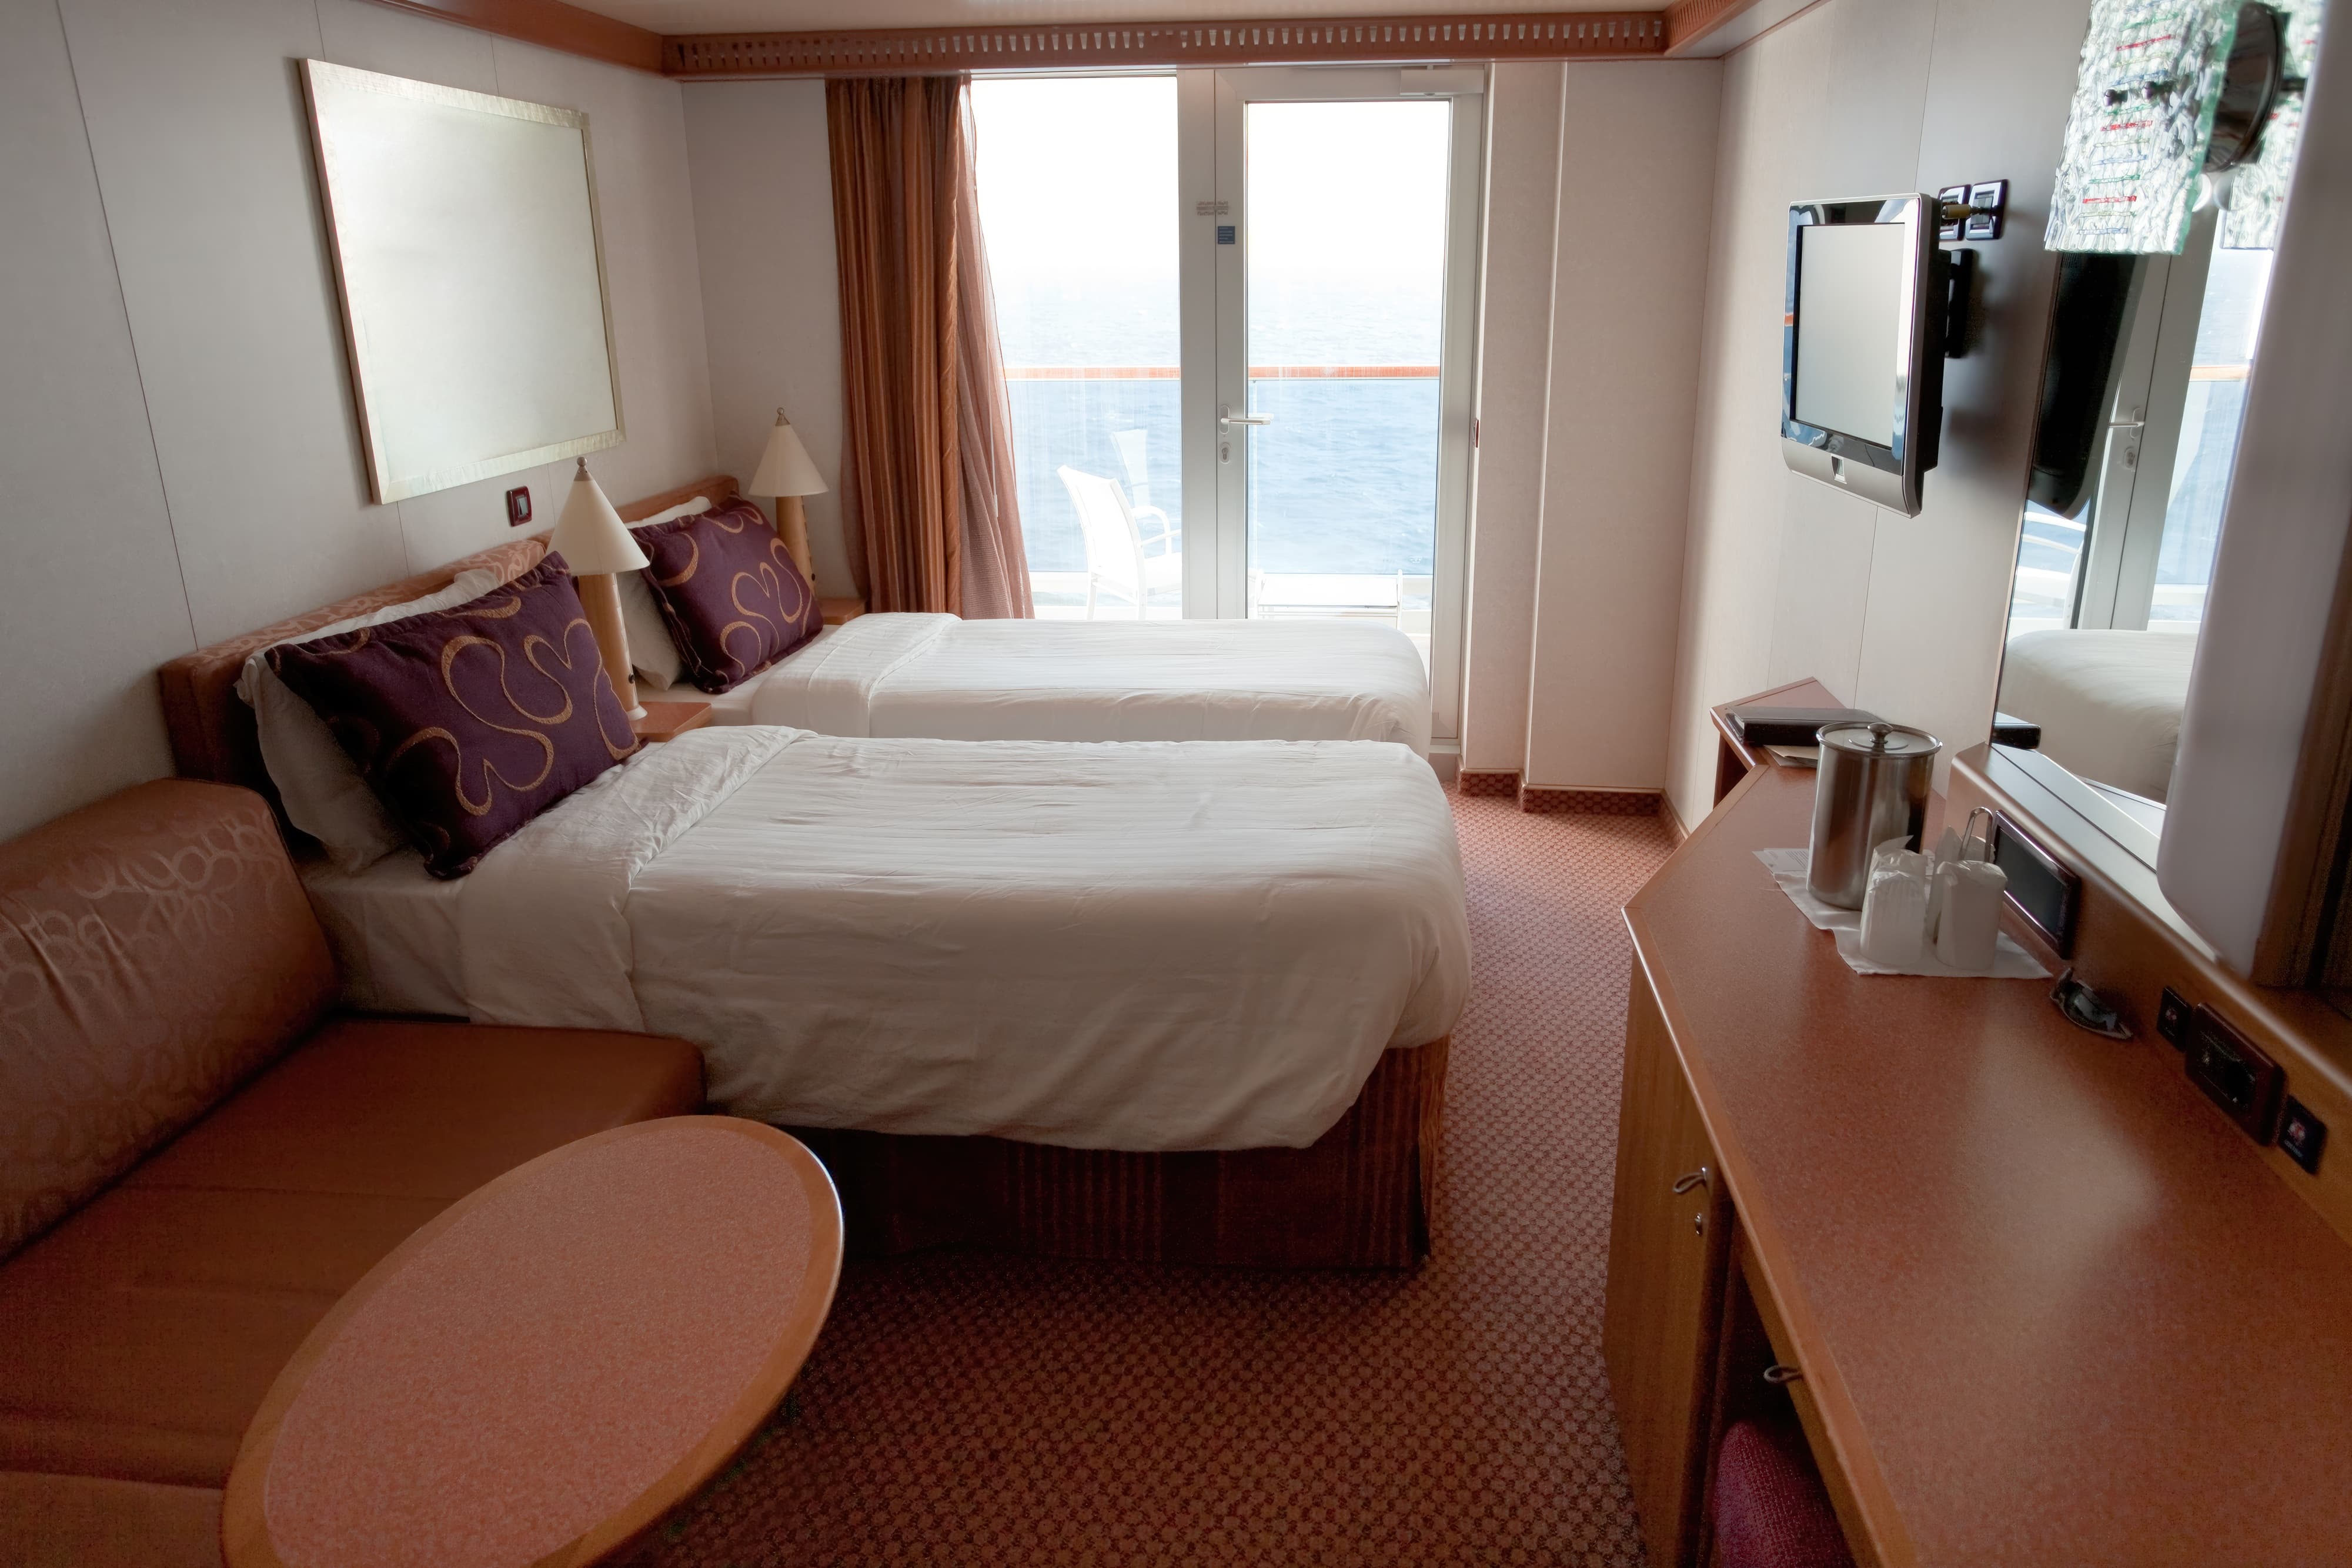 Hotel room on cruise liner